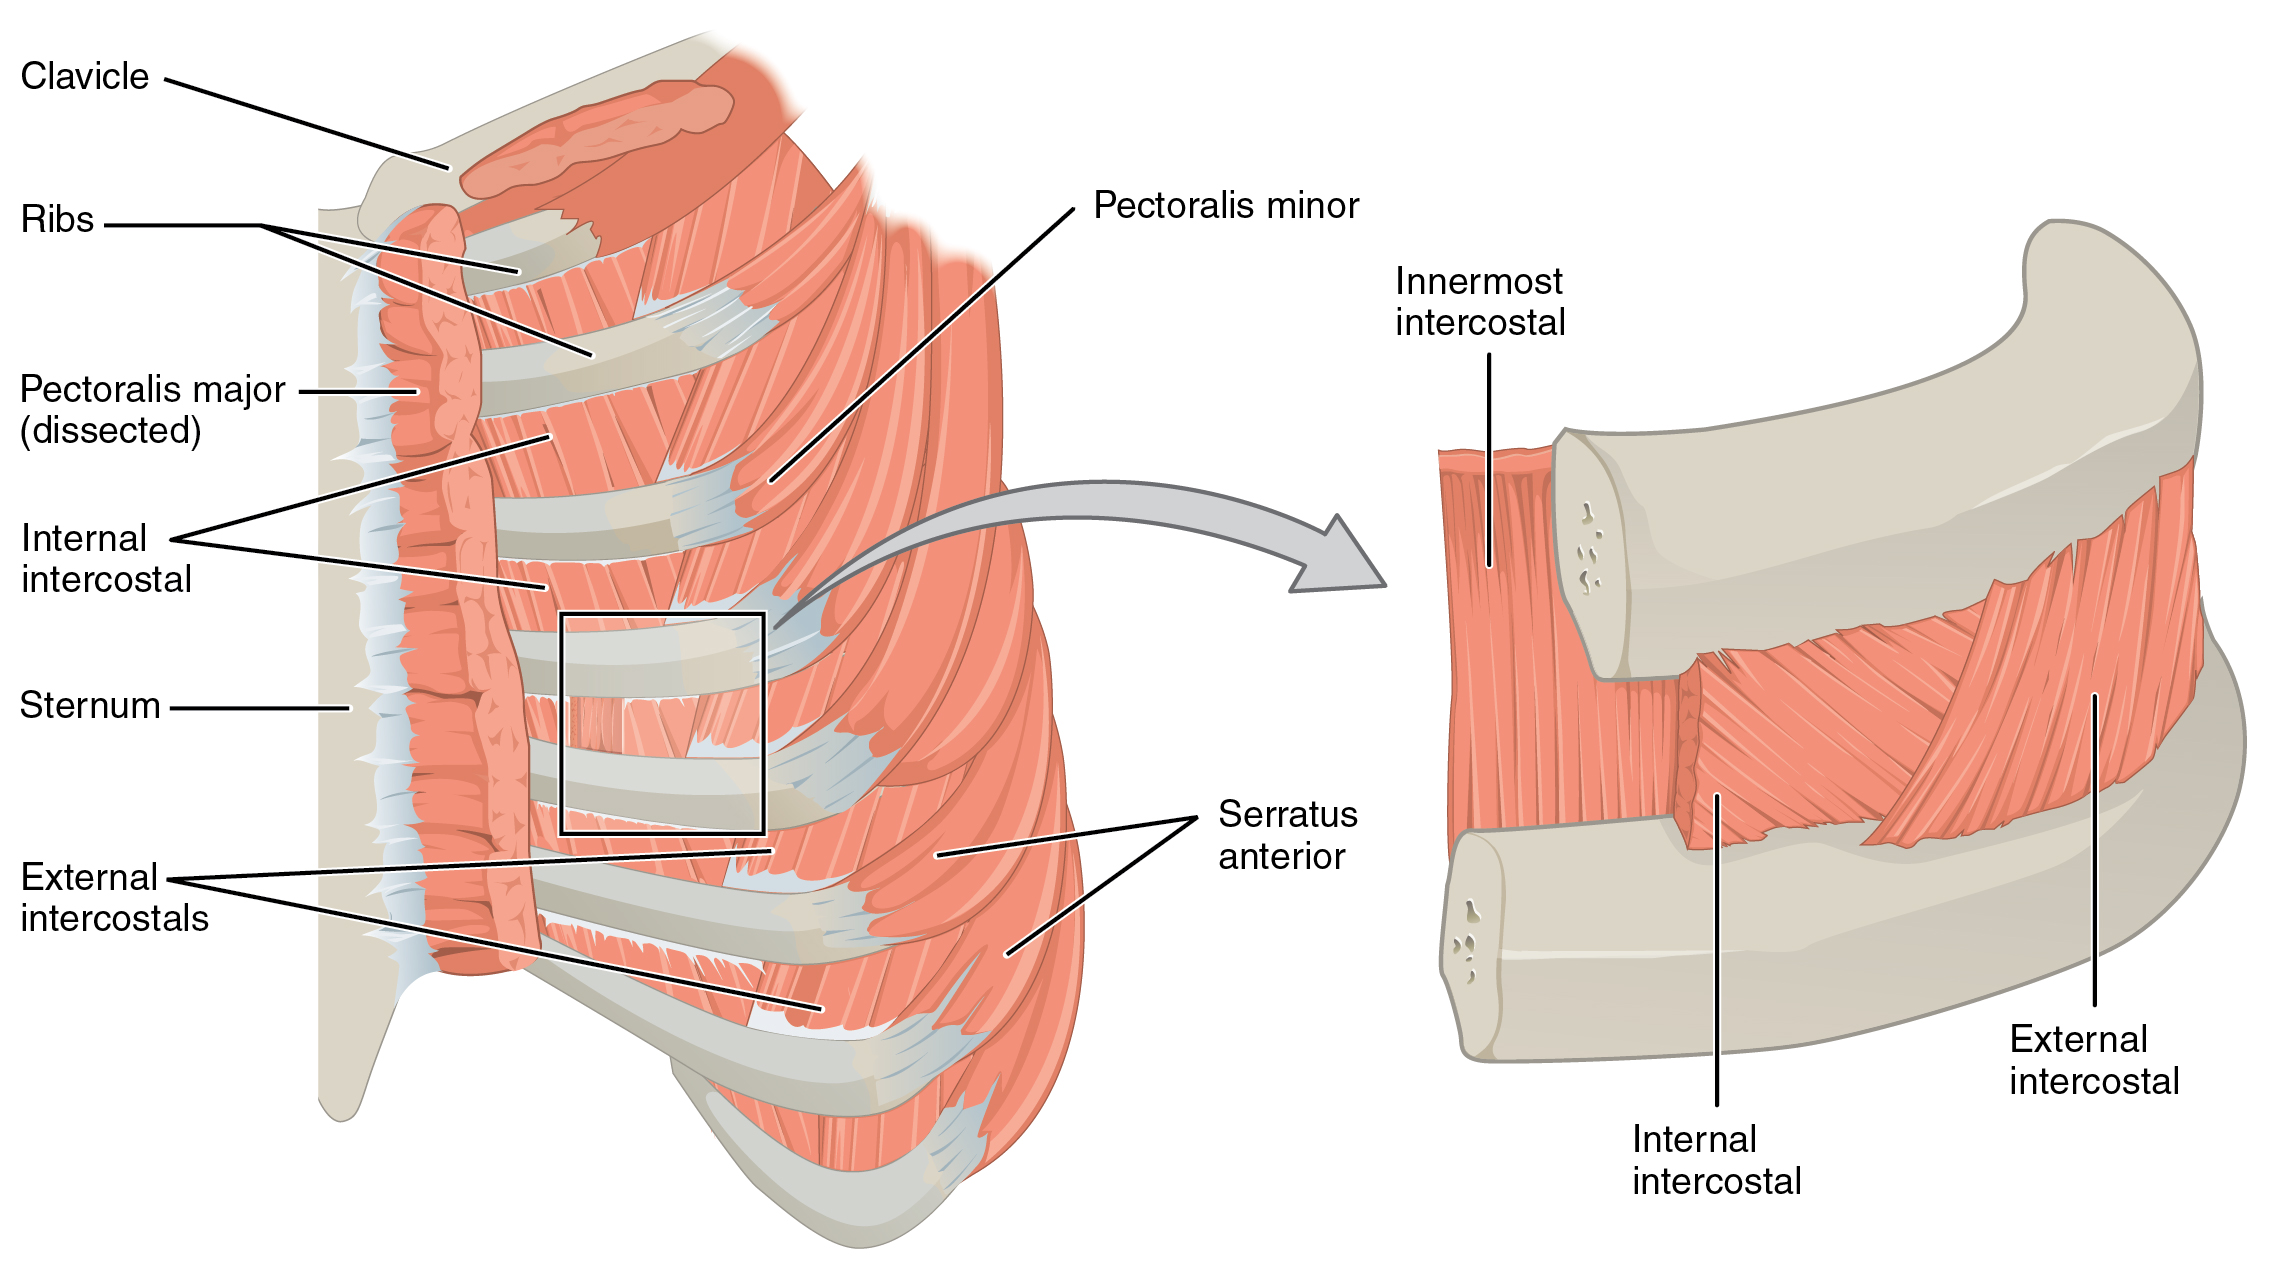 This figure shows the muscles in the thorax. The left panel shows the ribs, the major bones, and the muscles connecting them. The right panel shows a magnified view of the sternum and labels the muscles.